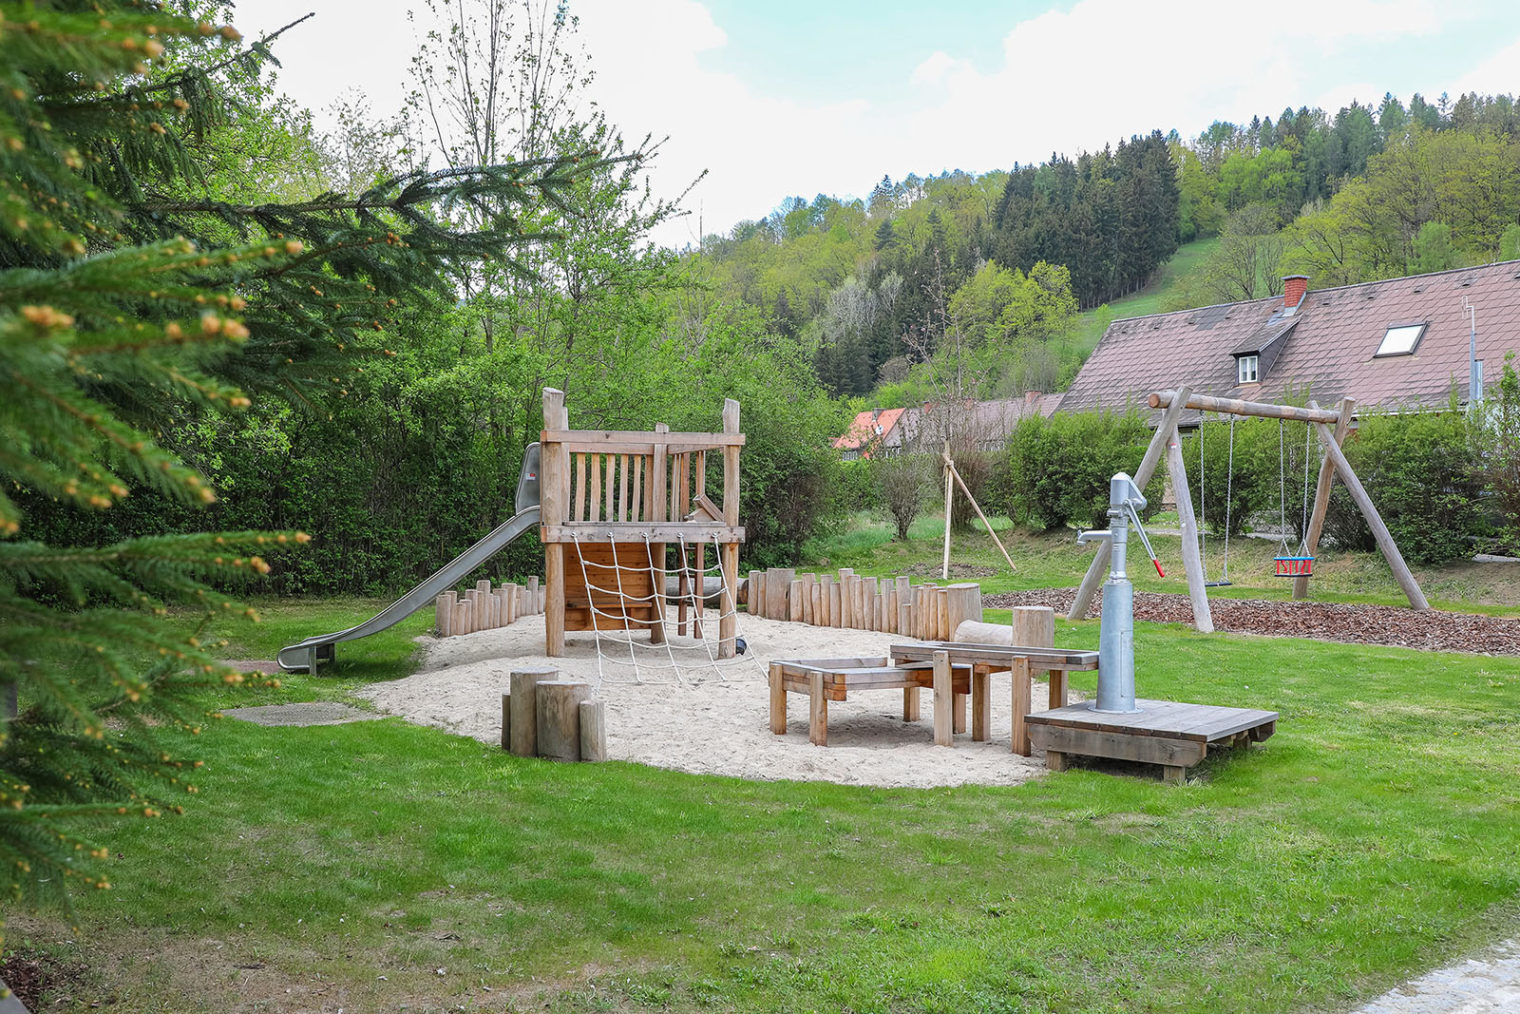 Sandpit and play equipment at the Prolebersiedlung playground